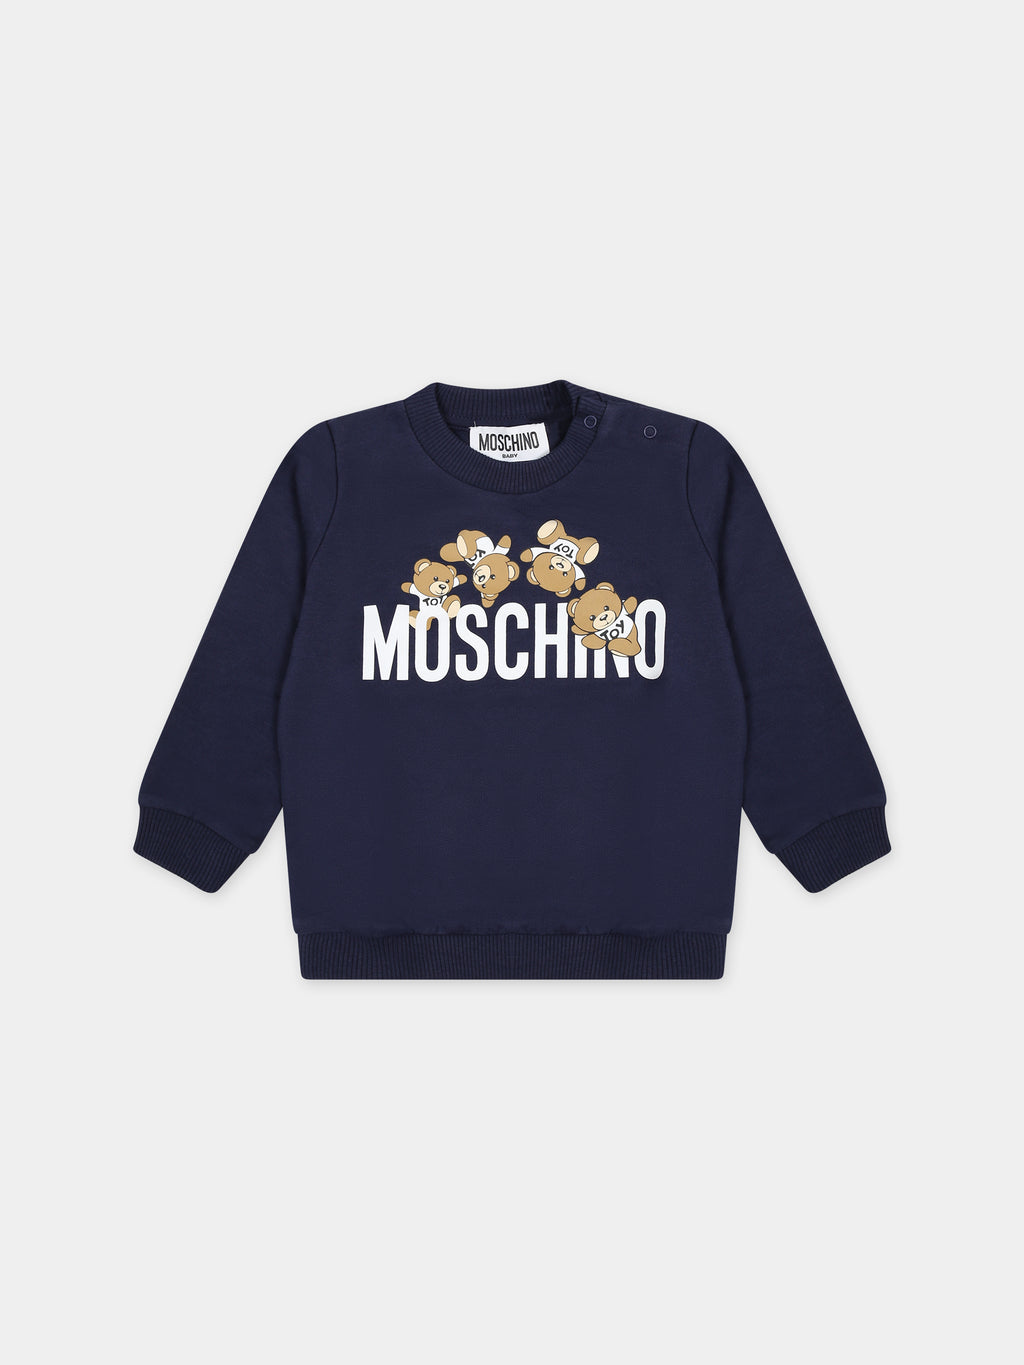 Blue sweatshirt for babies with Teddy Bears and logo